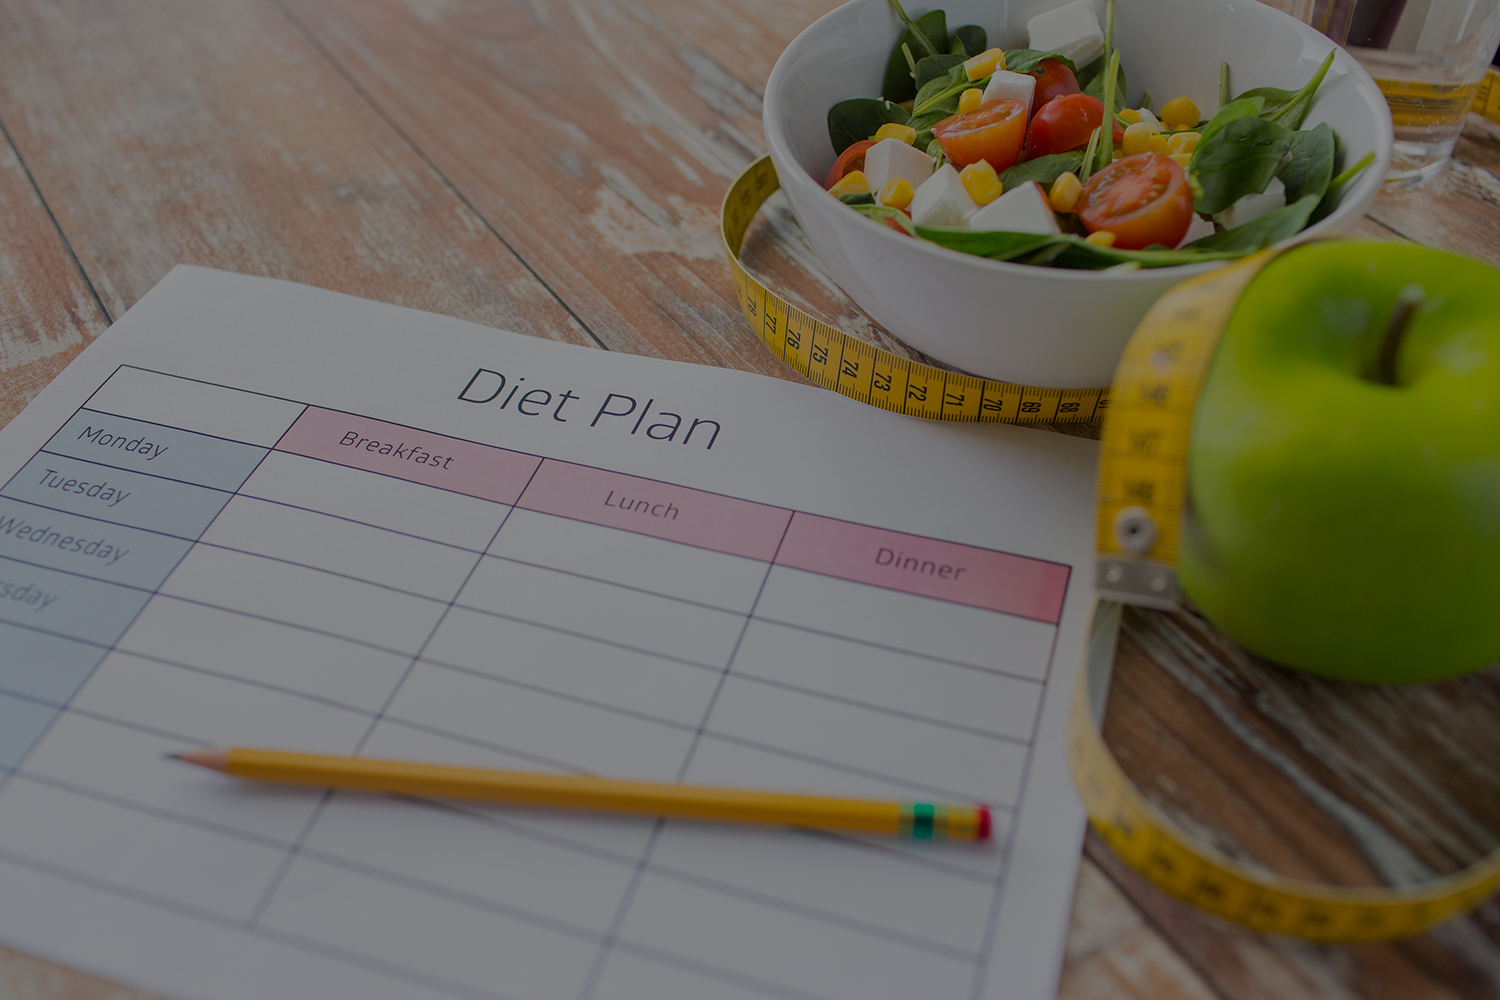 healthy eating, dieting, slimming and weigh loss concept - close up of diet plan paper green apple, measuring tape and salad